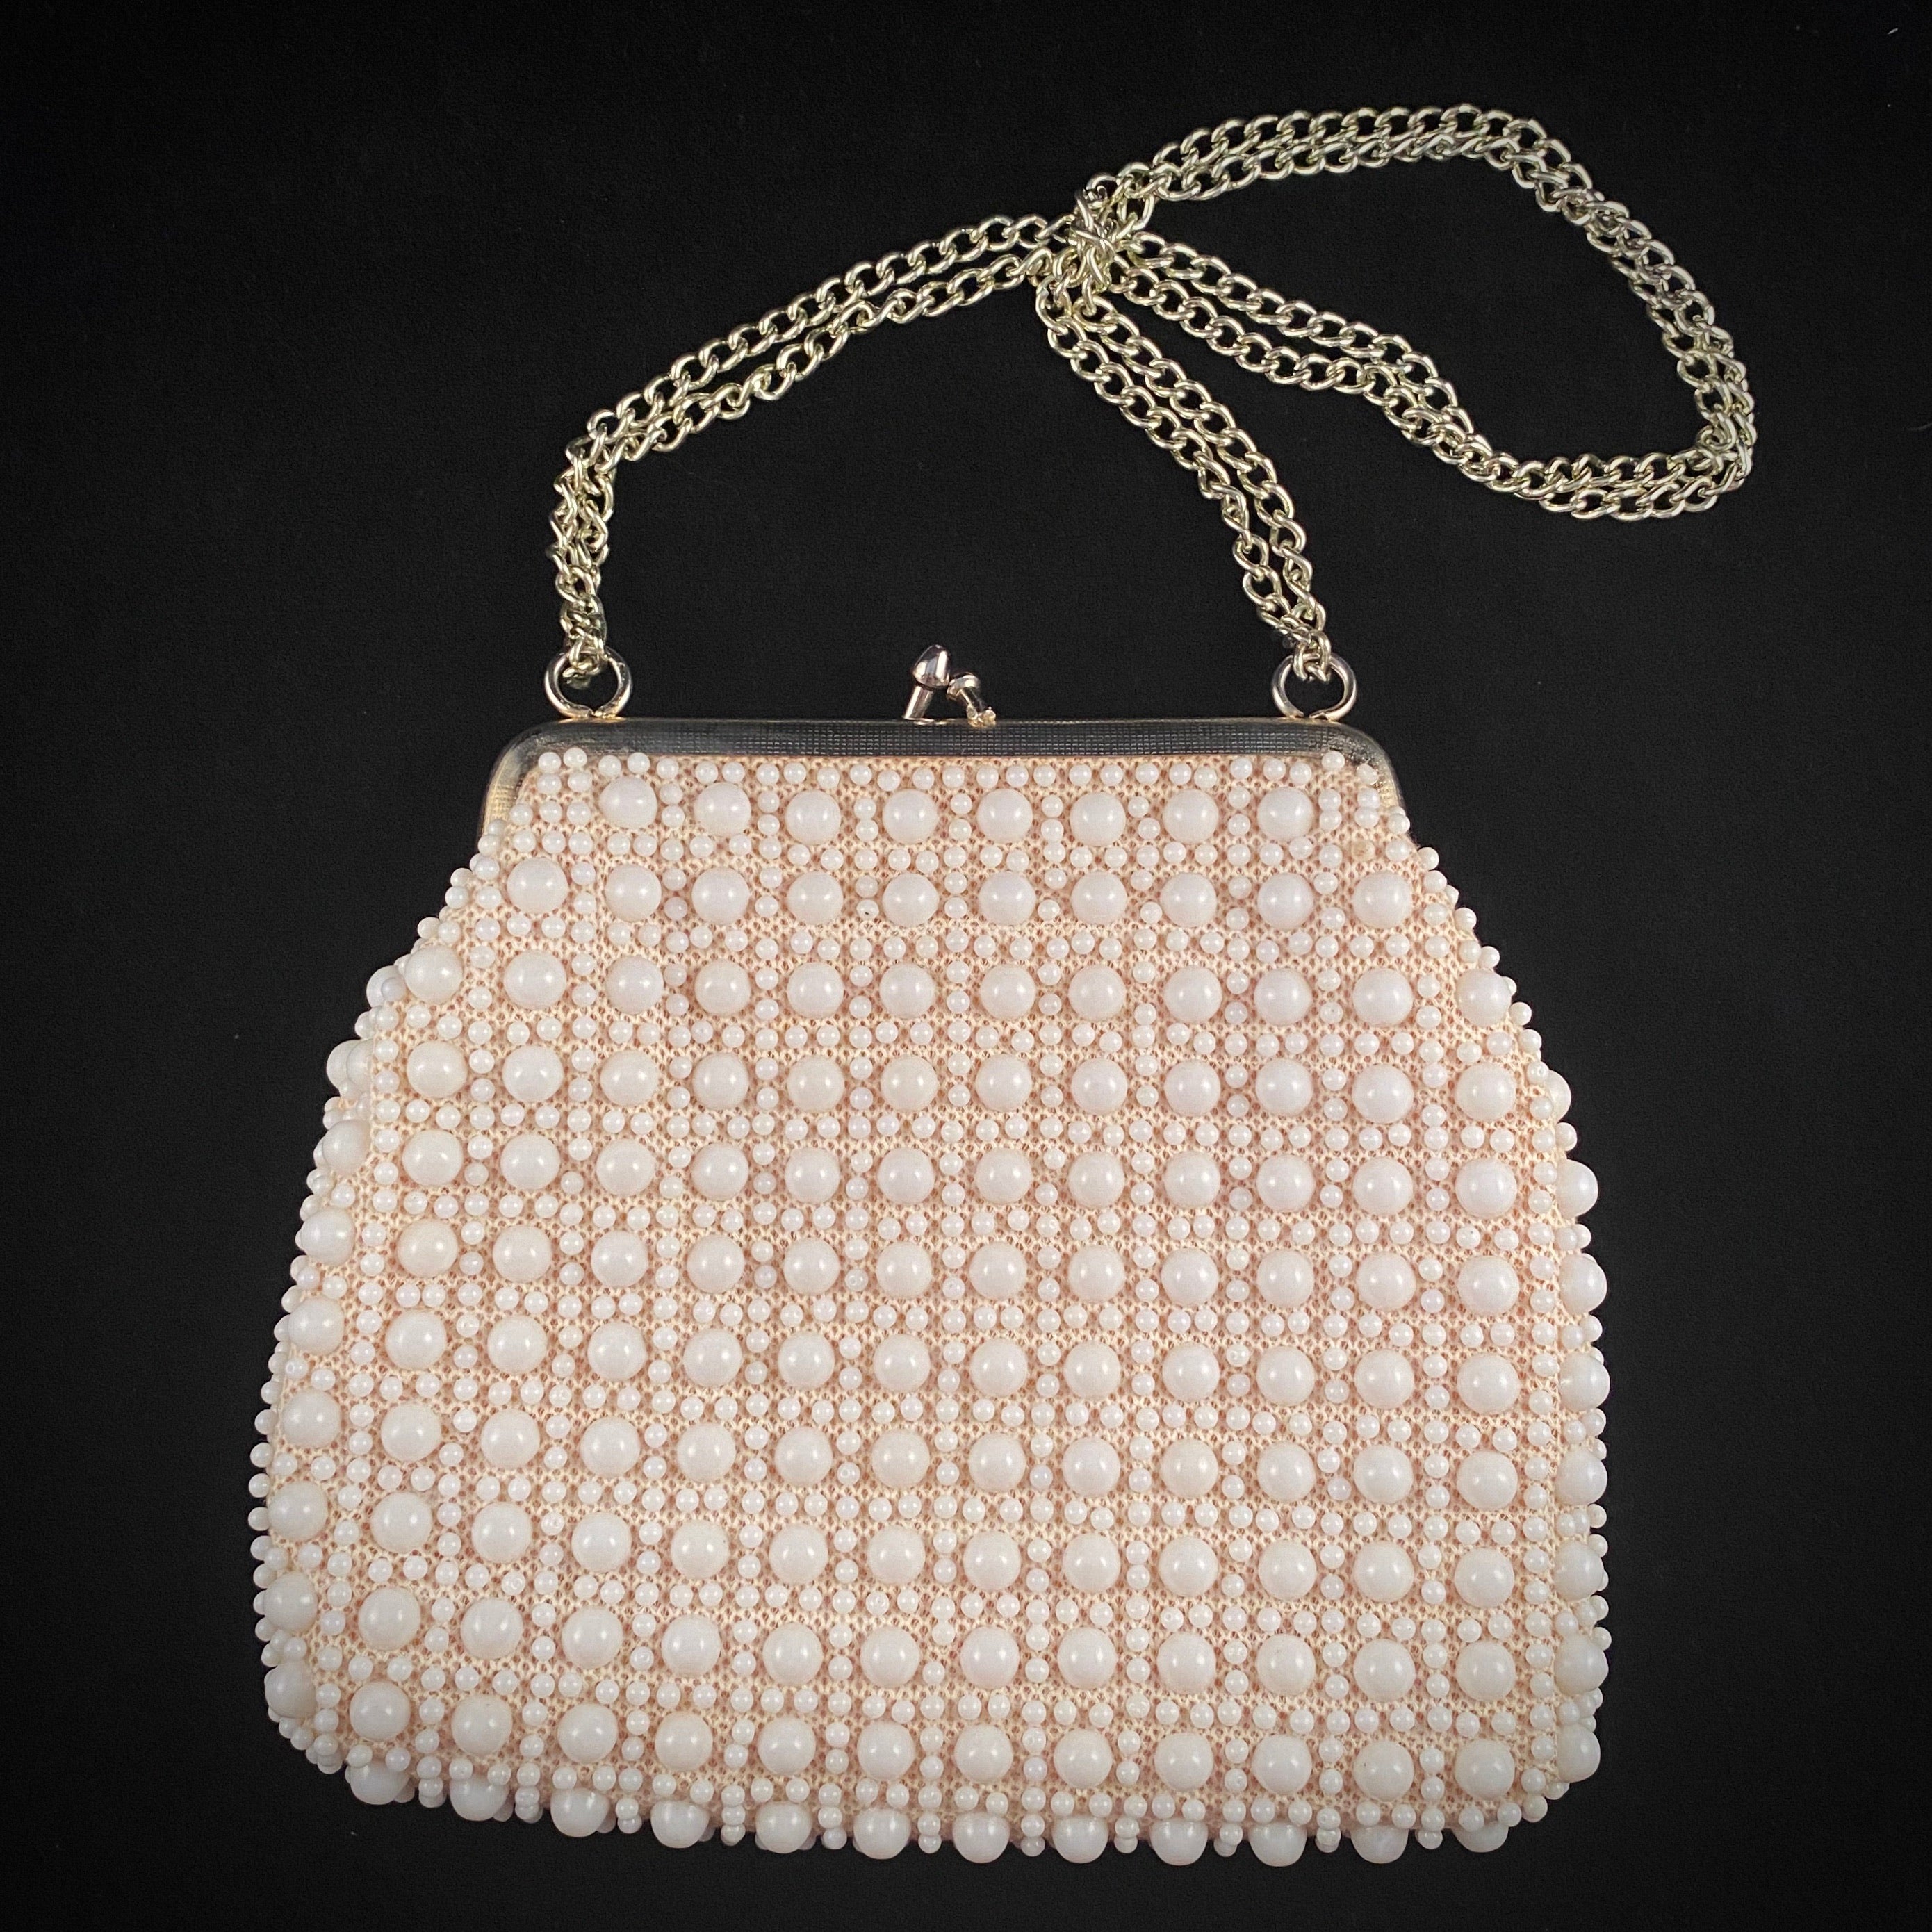 Late 60s/ Early 70s Beaded Purse